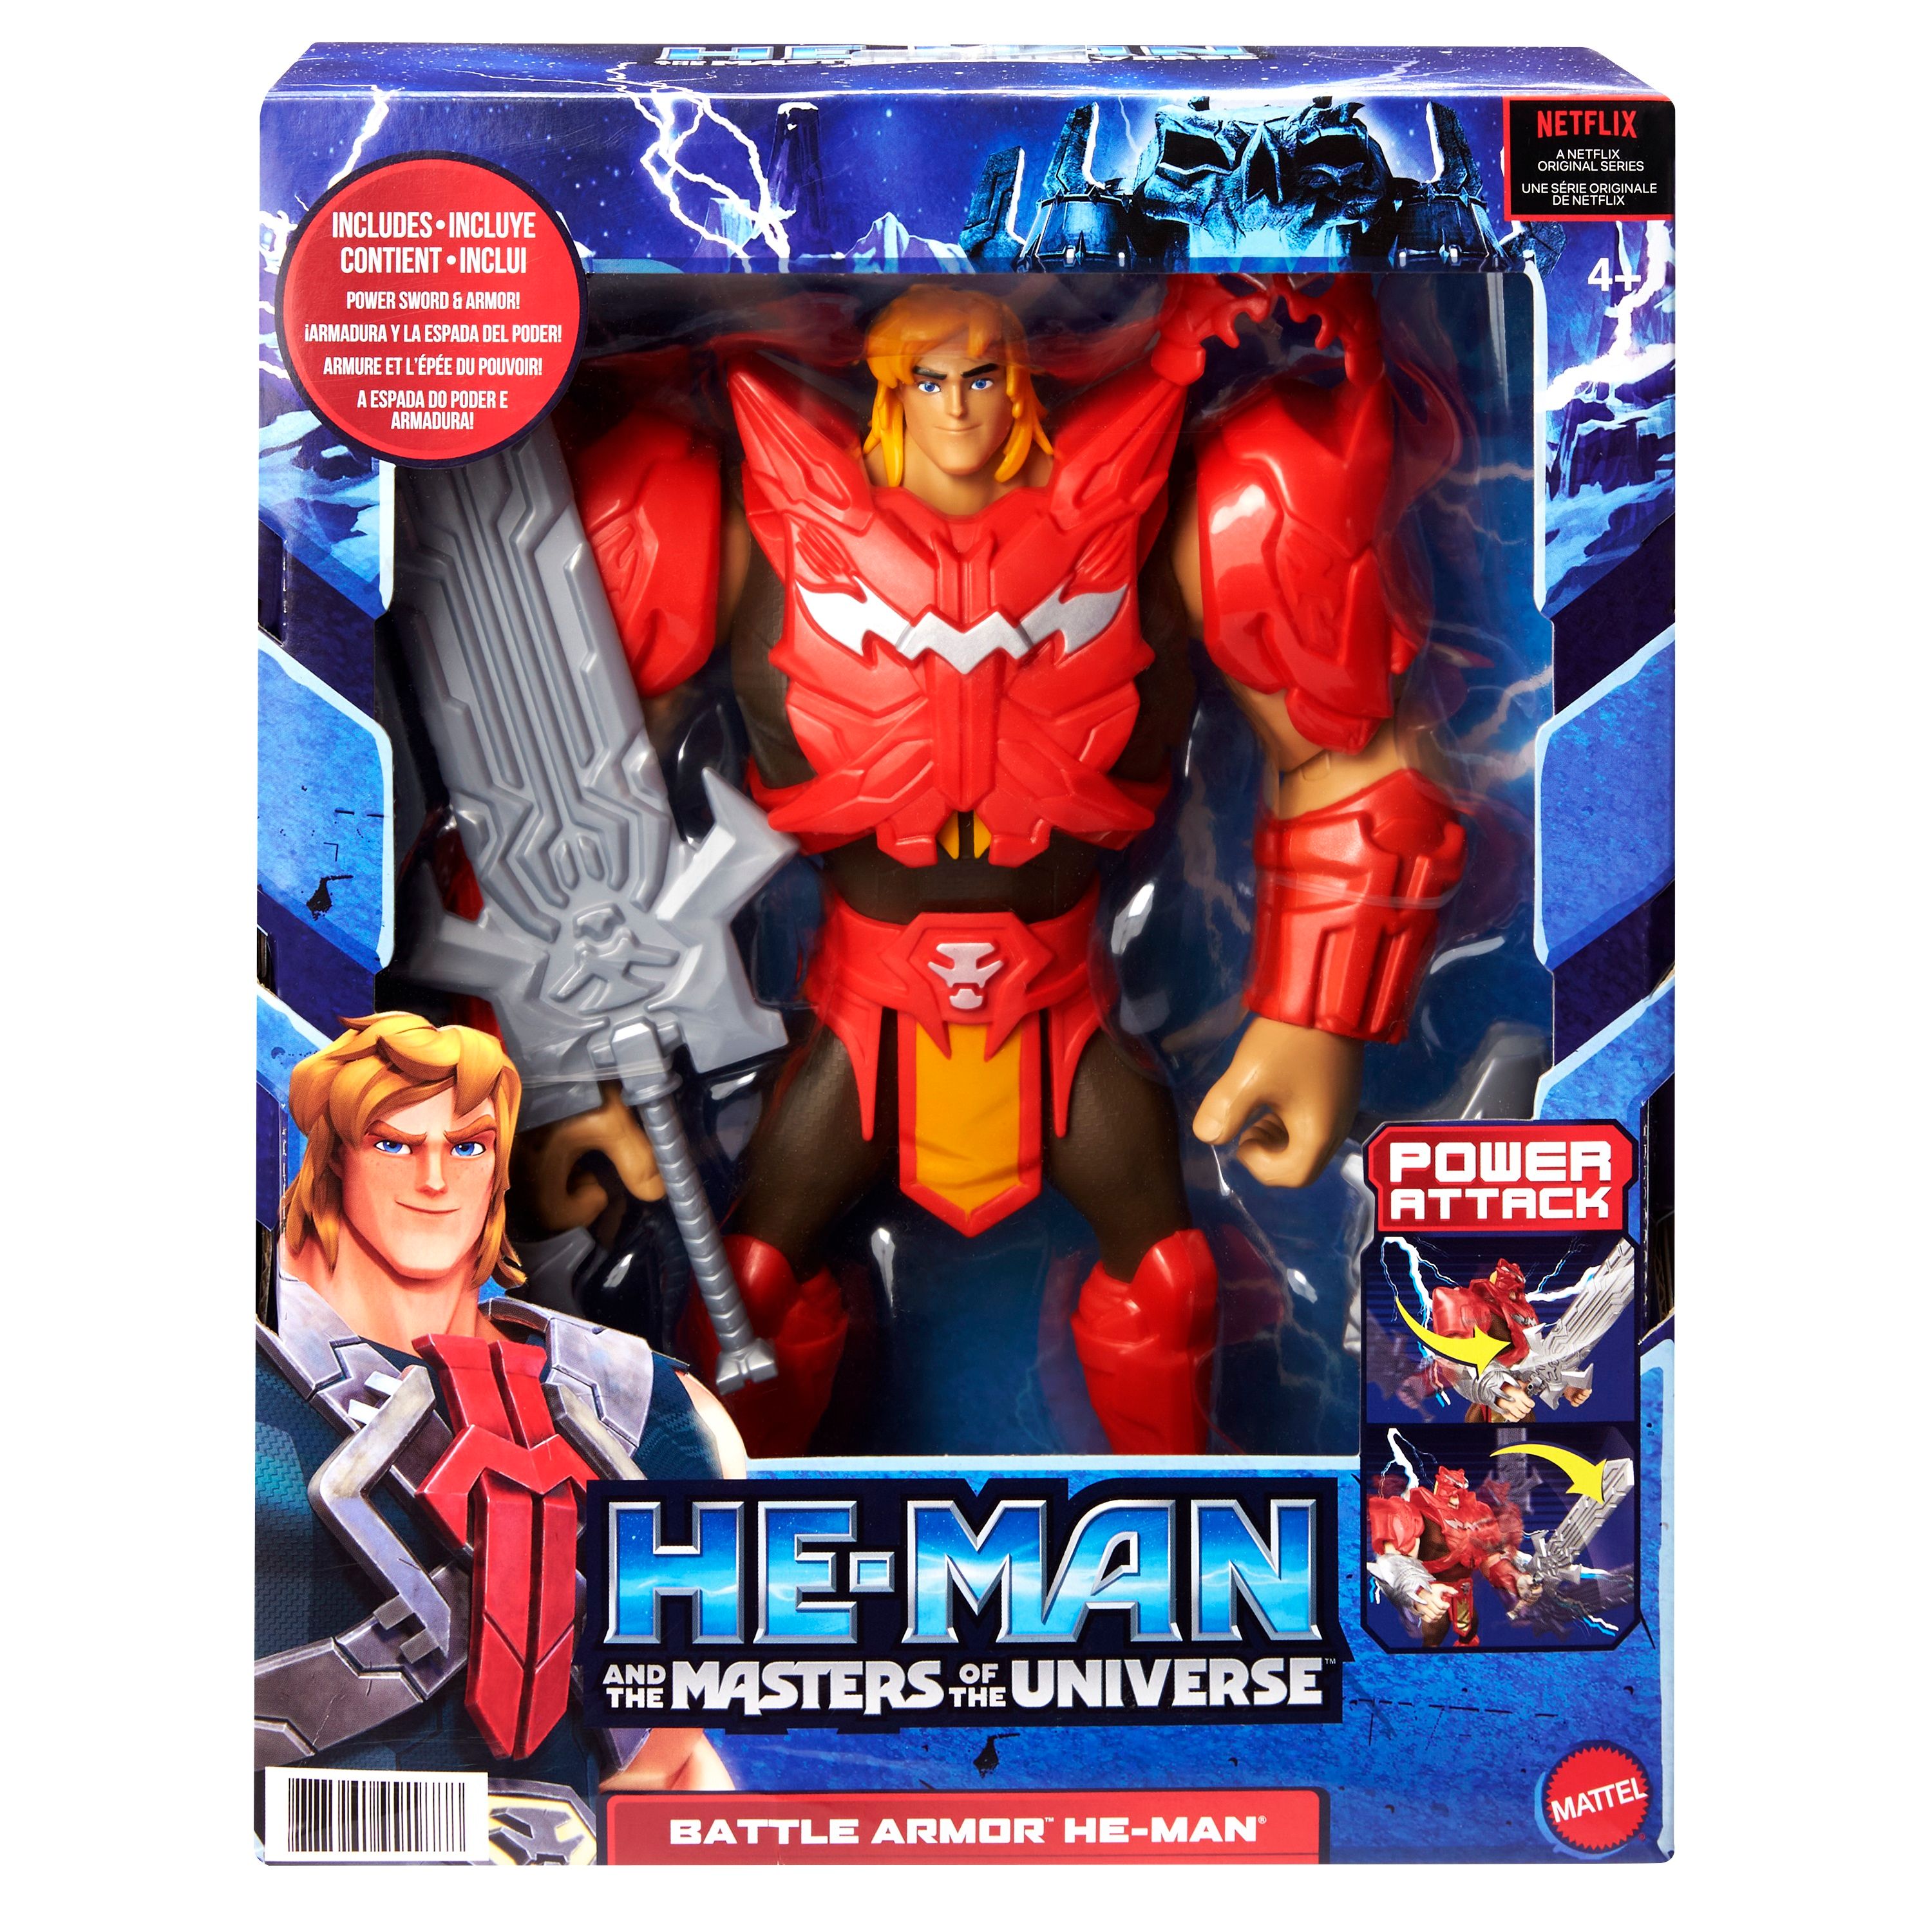 He Man And The Masters Of The Universe Skeletor Power Attack Netflix Serie